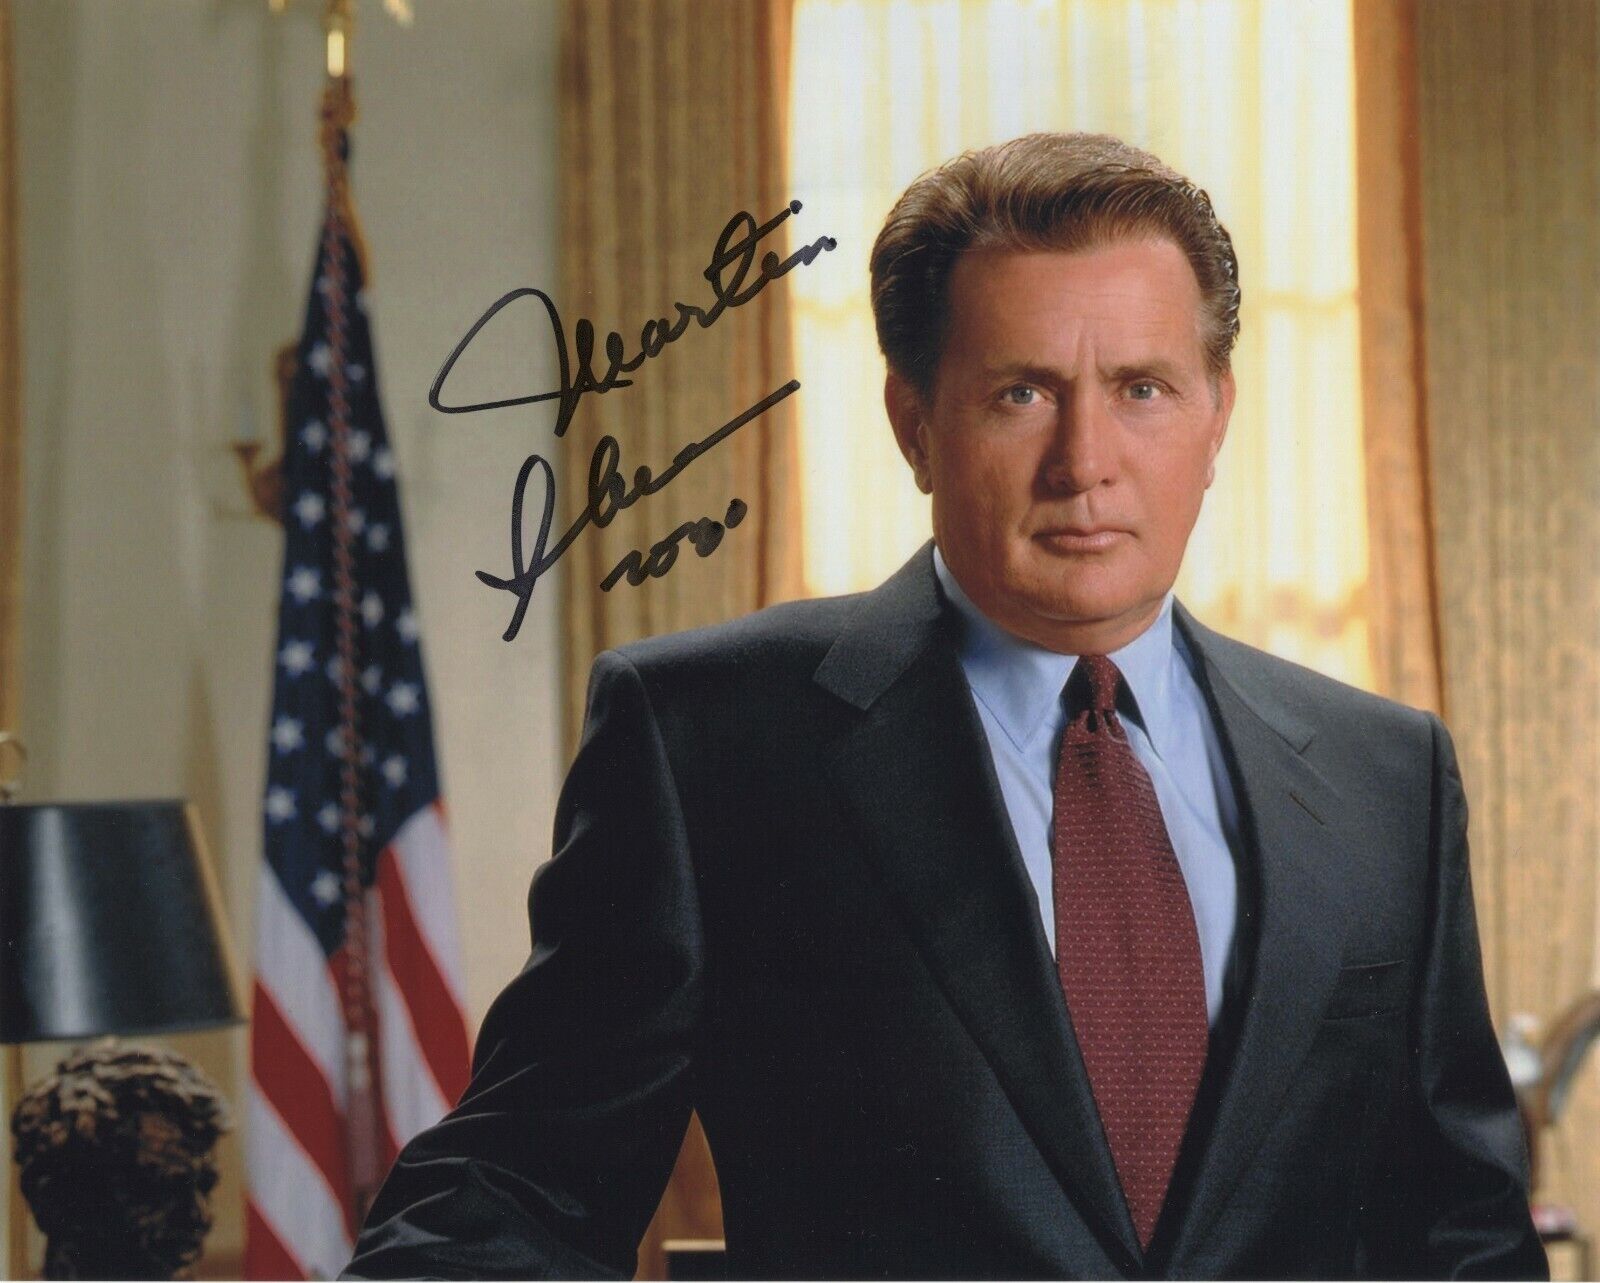 MARTIN SHEEN SIGNED AUTOGRAPH THE WEST WING 8X10 Photo Poster painting #2